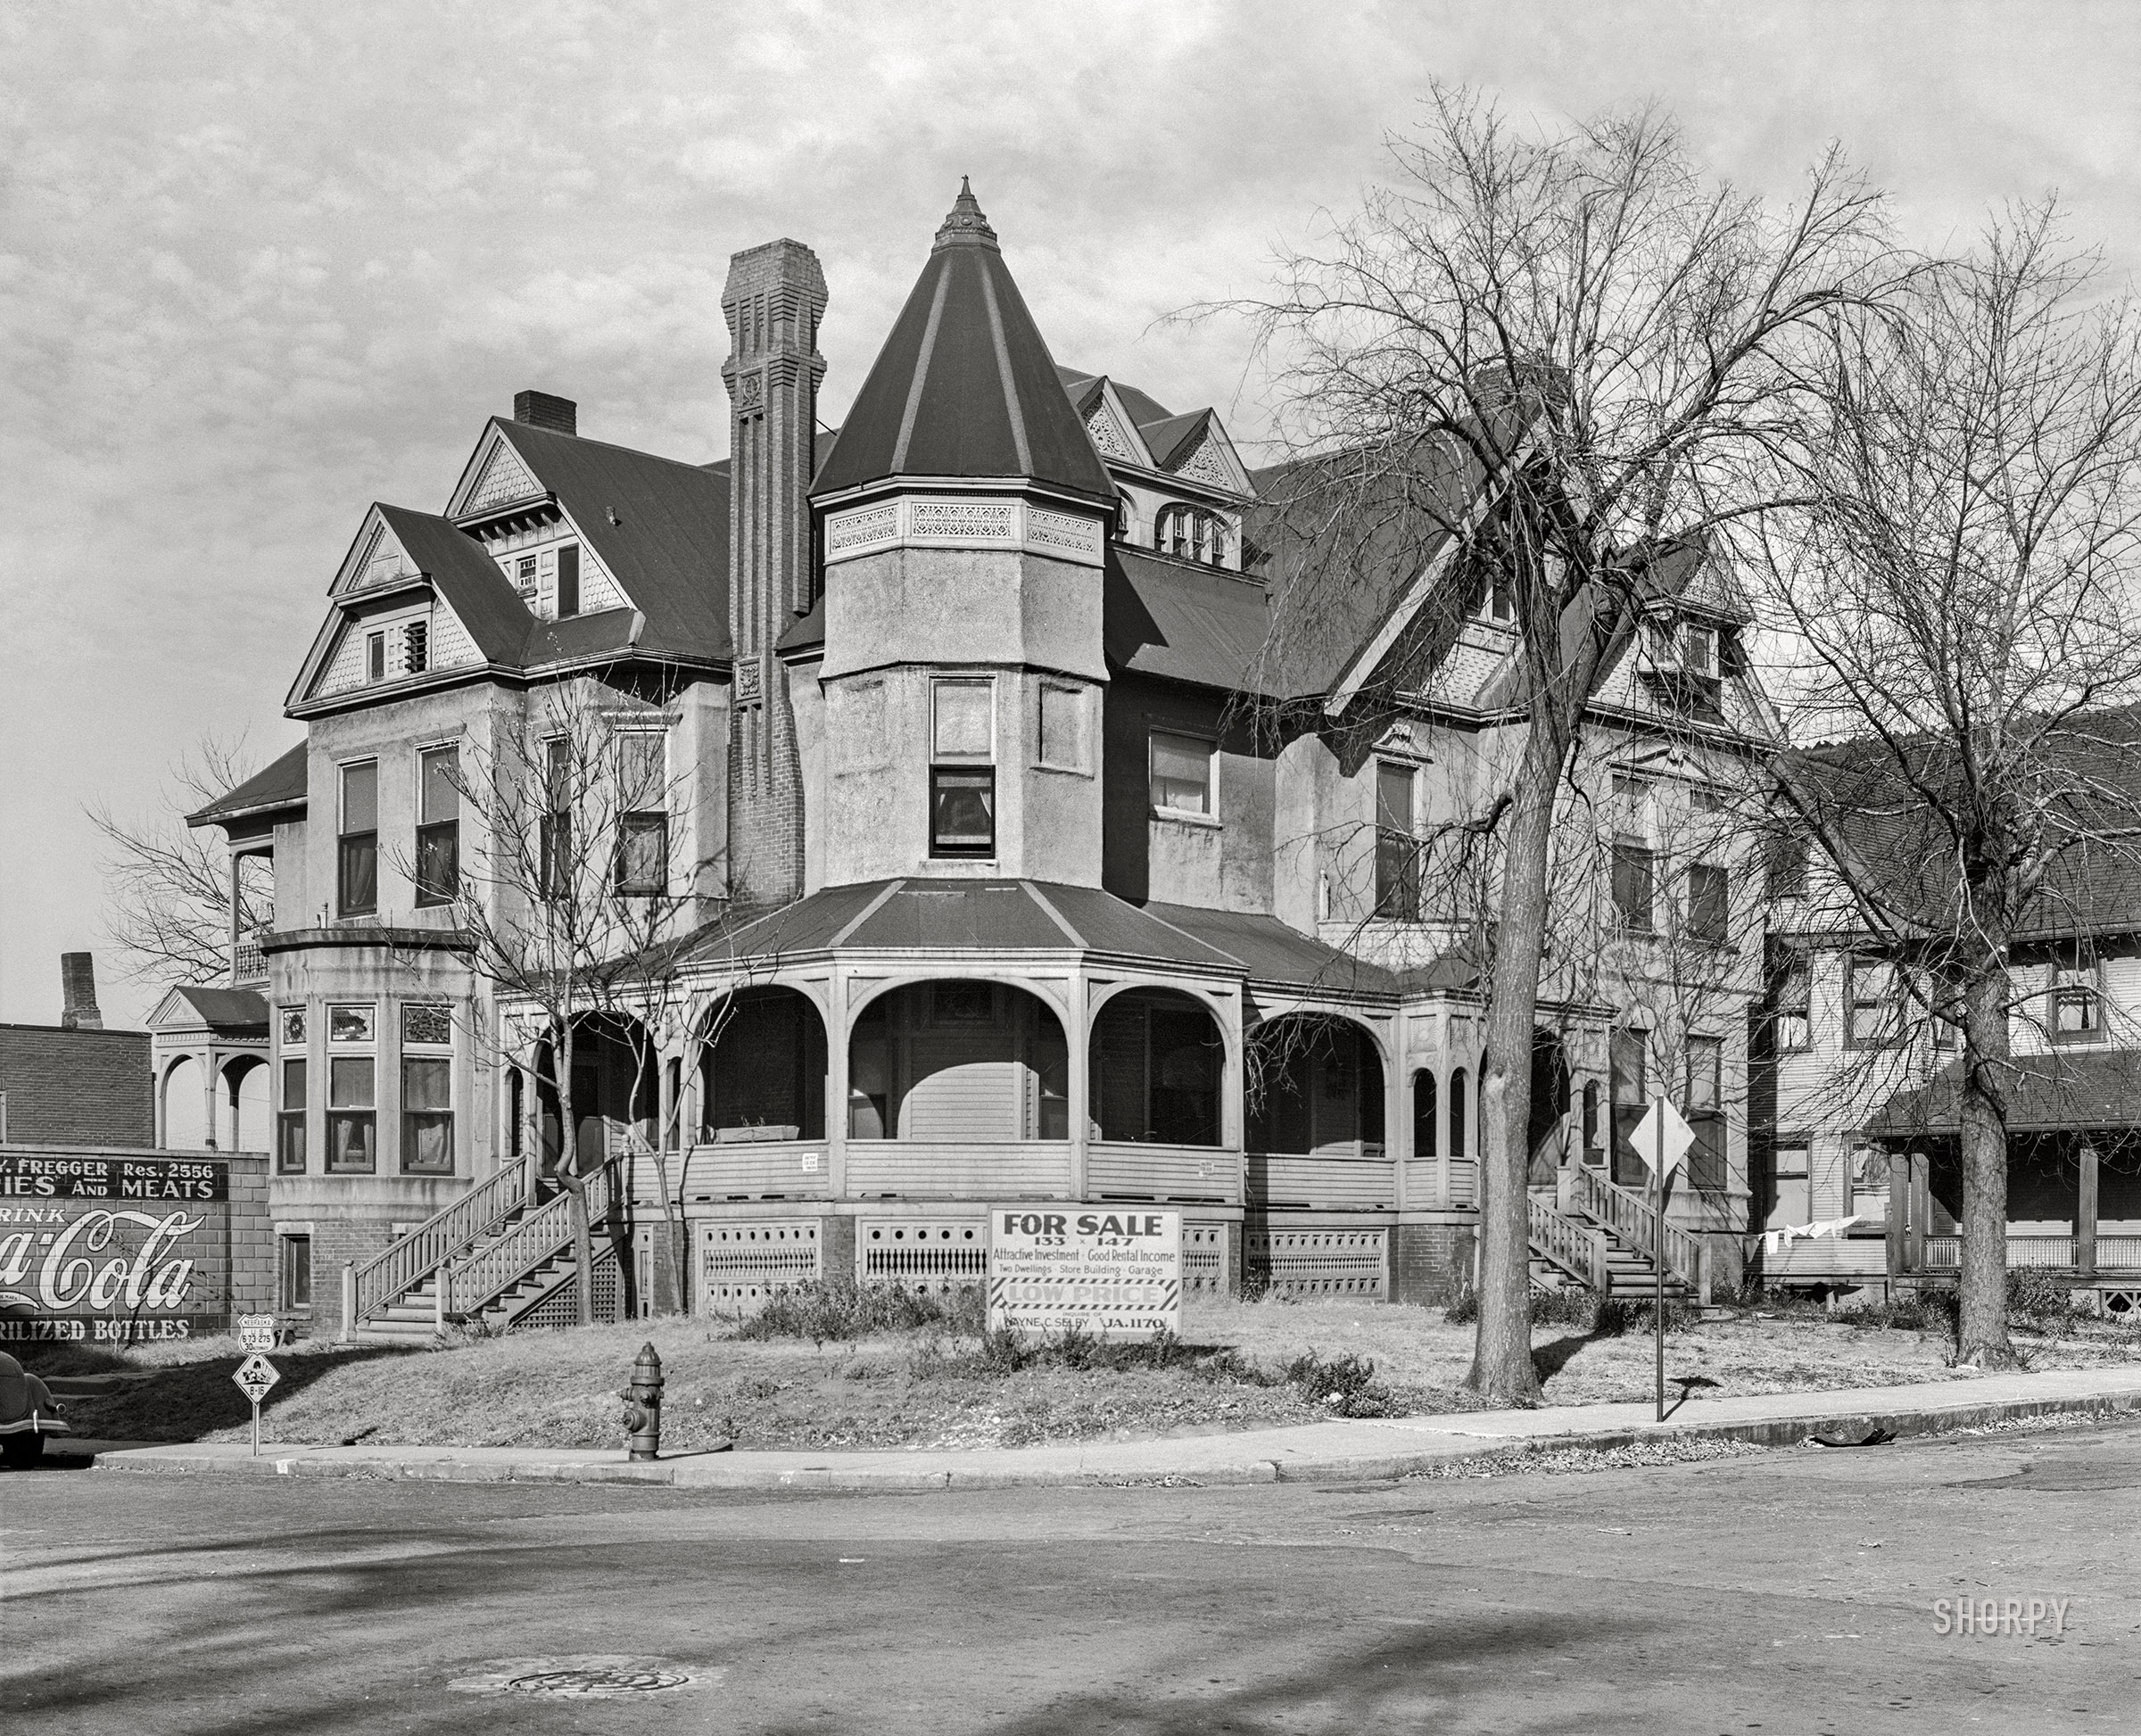 November 1938. "The old Paxton residence. Omaha, Nebraska." Medium format acetate negative by John Vachon for the Farm Security Administration. View full size.